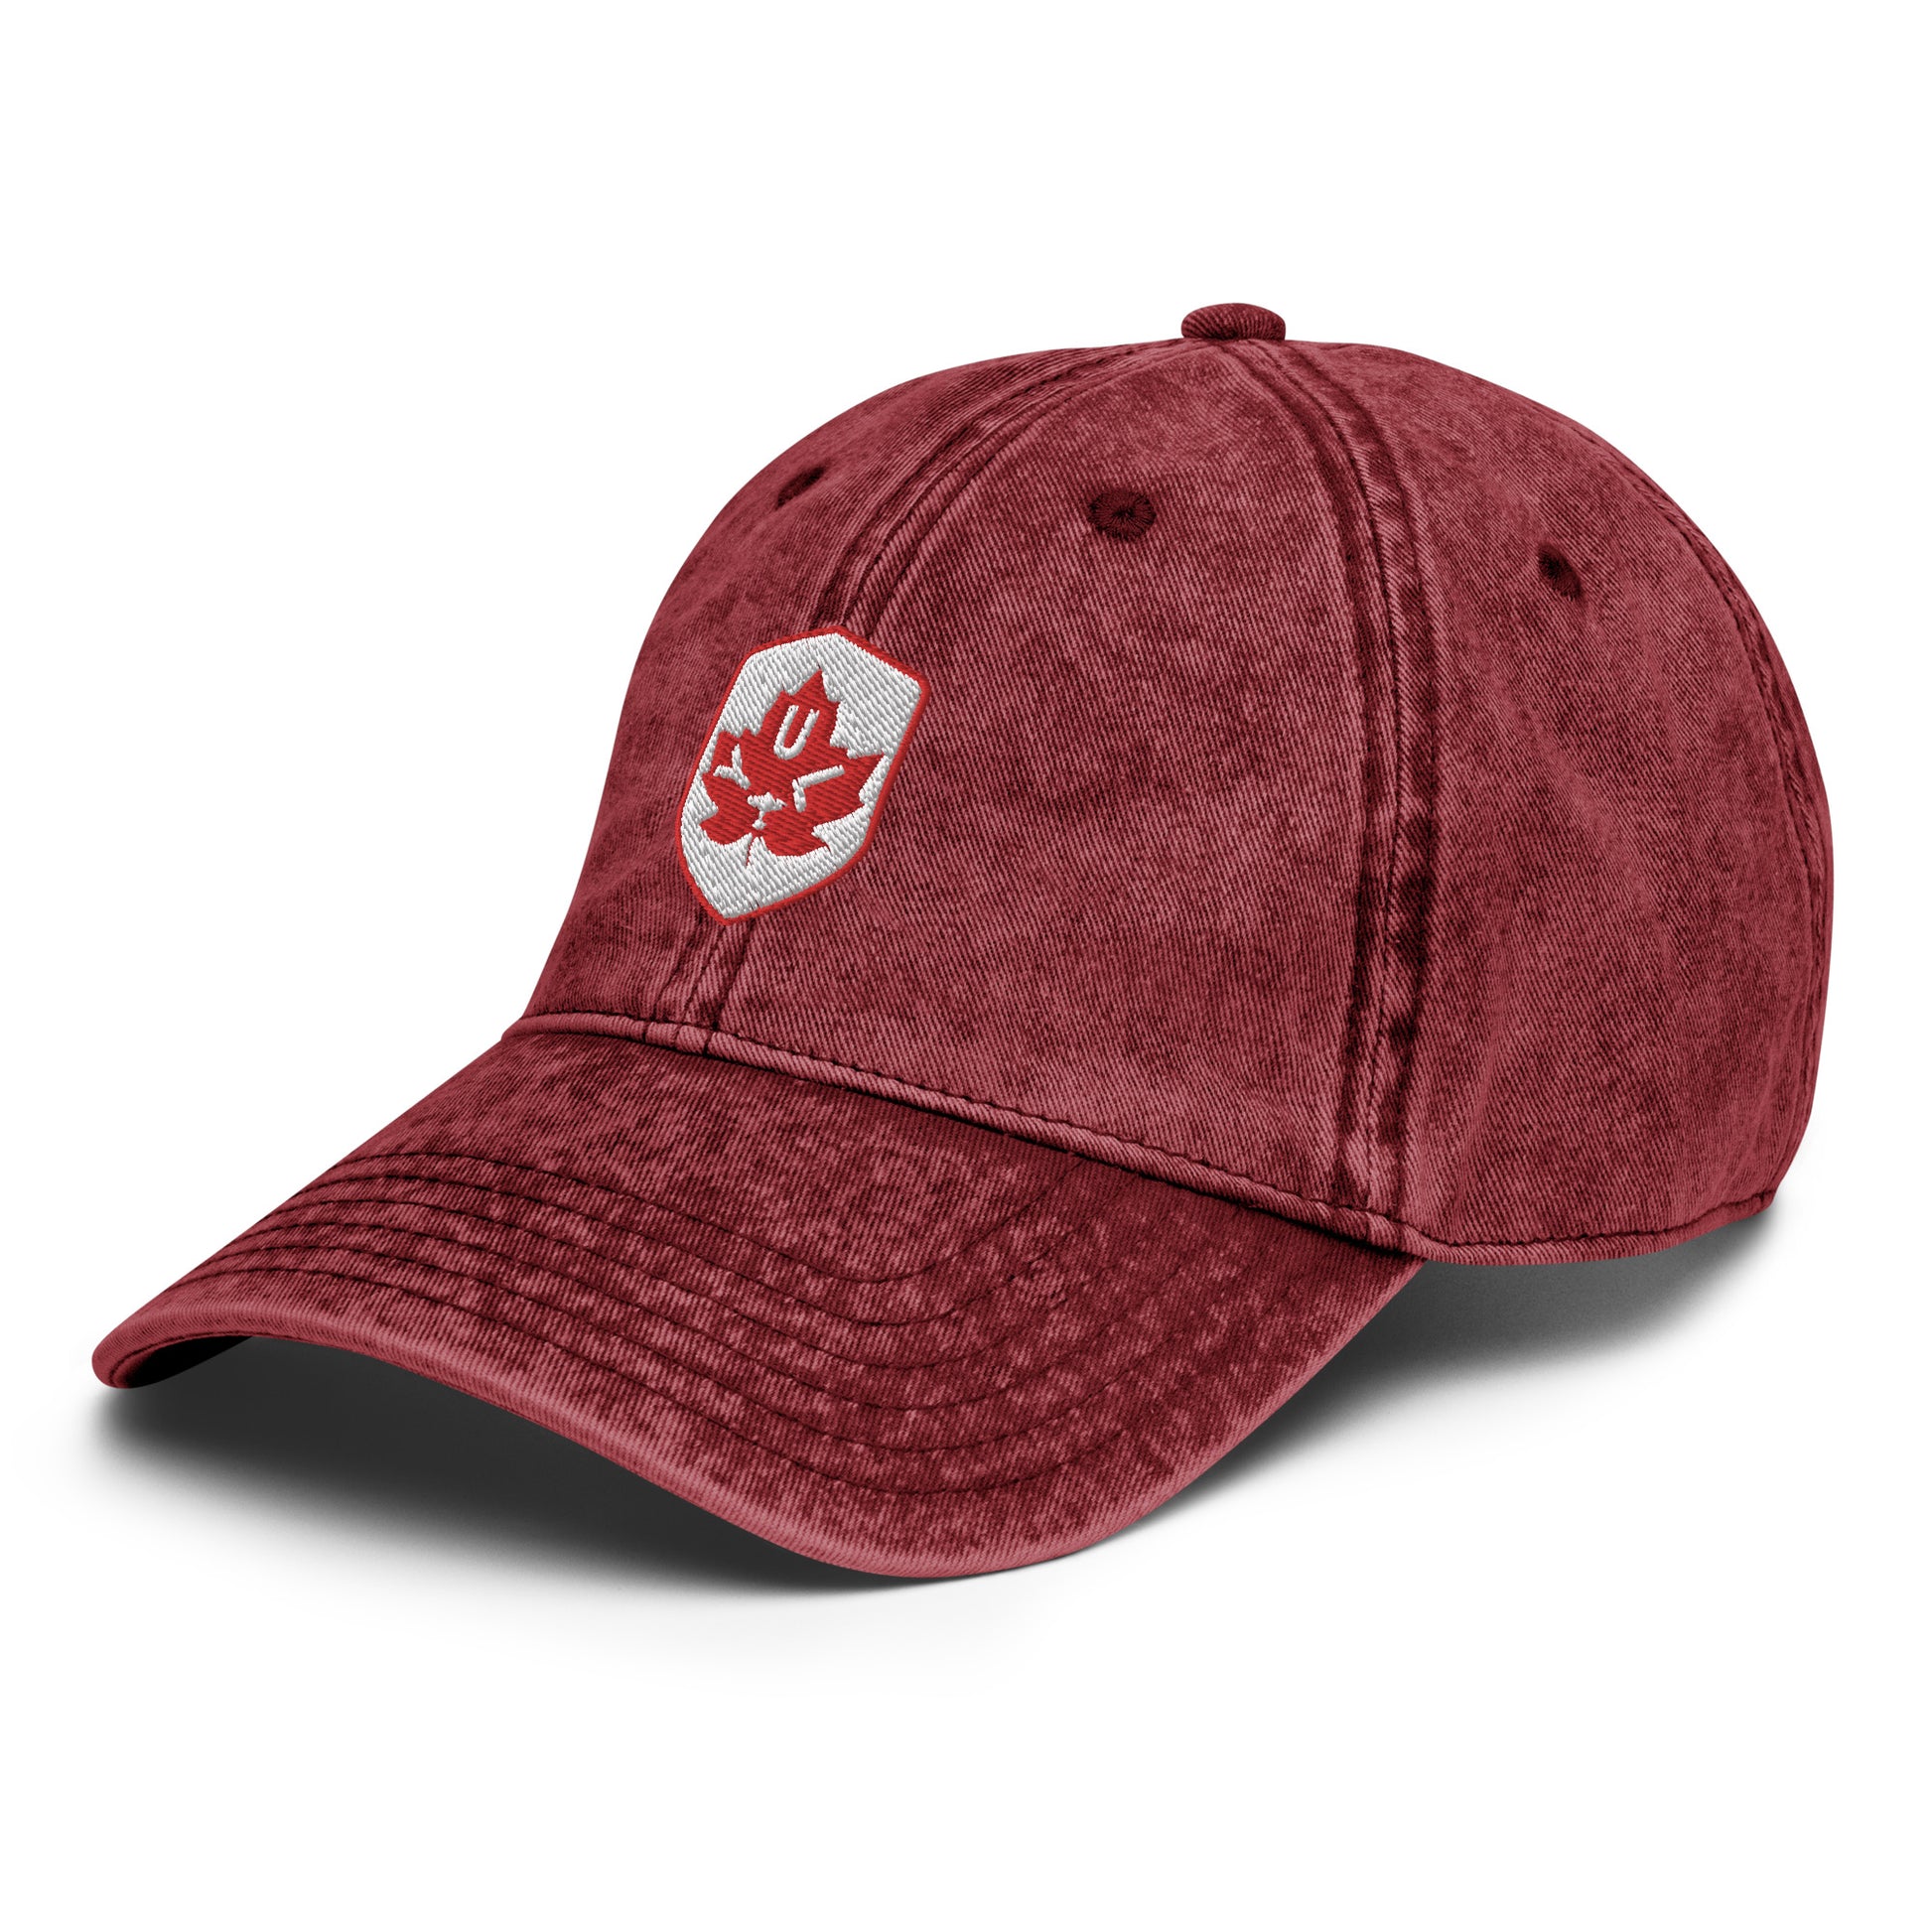 Maple Leaf Twill Cap - Red/White • YUL Montreal • YHM Designs - Image 18